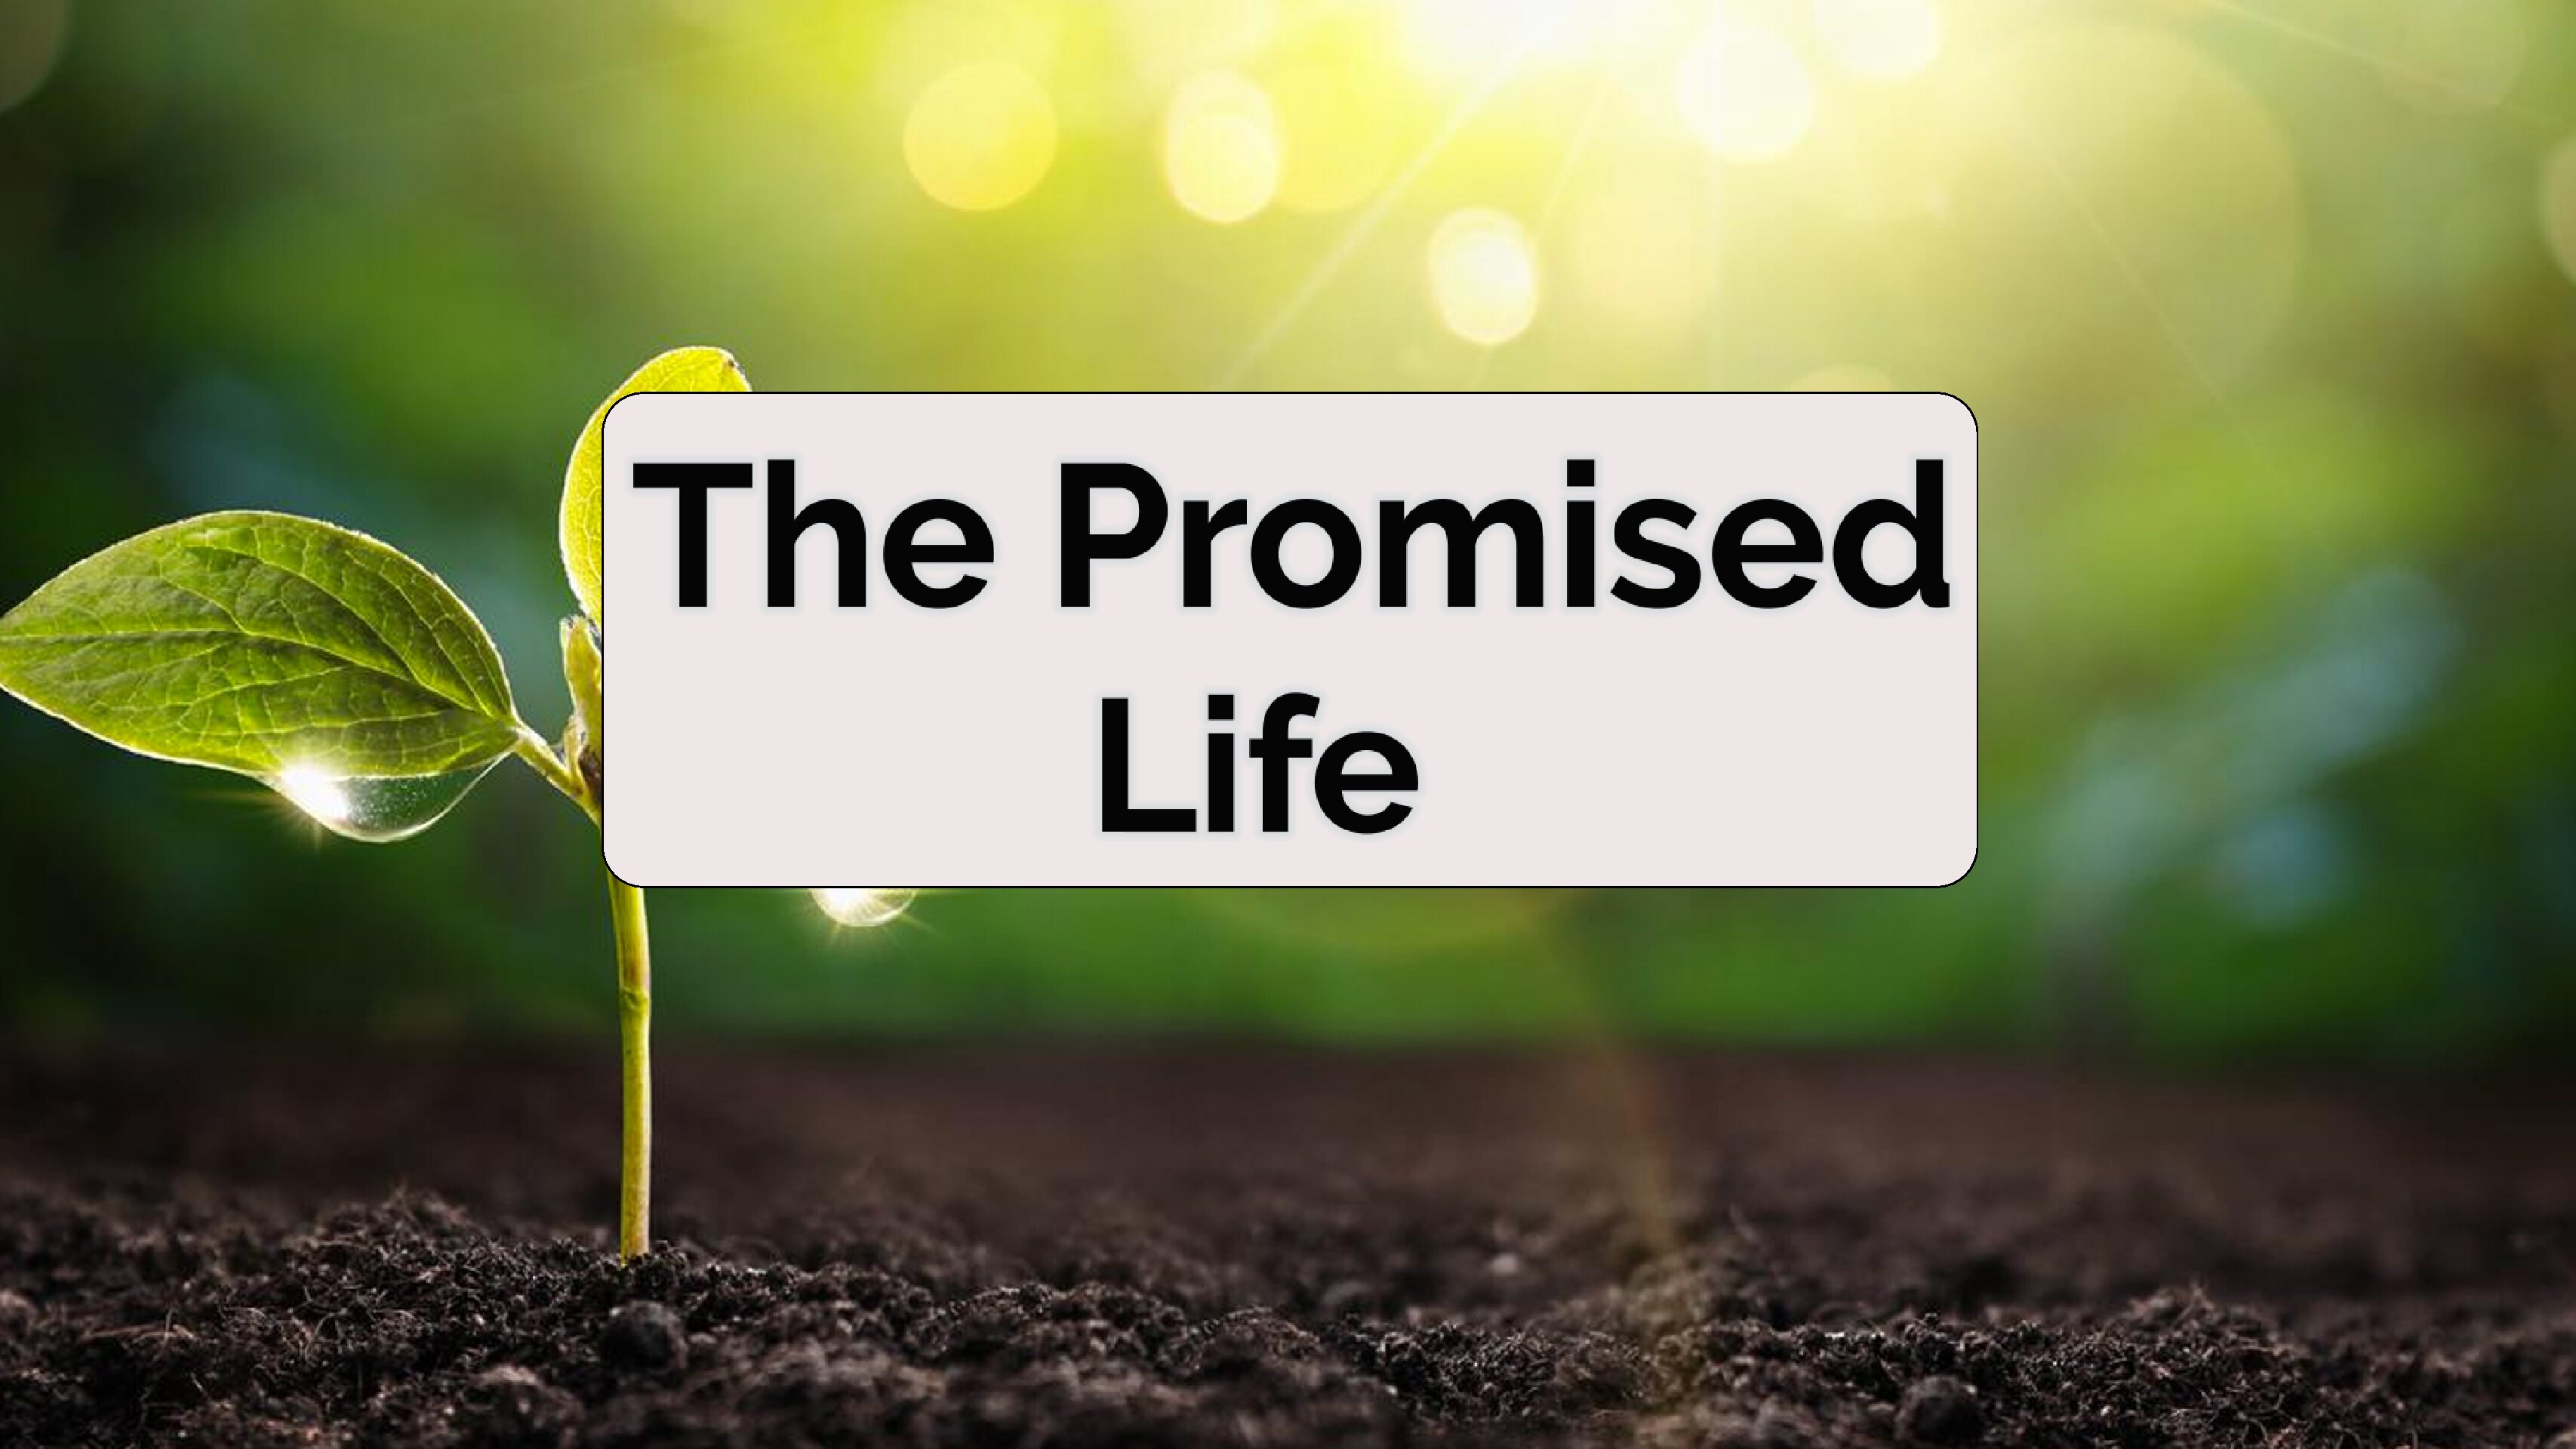 The Promised Life